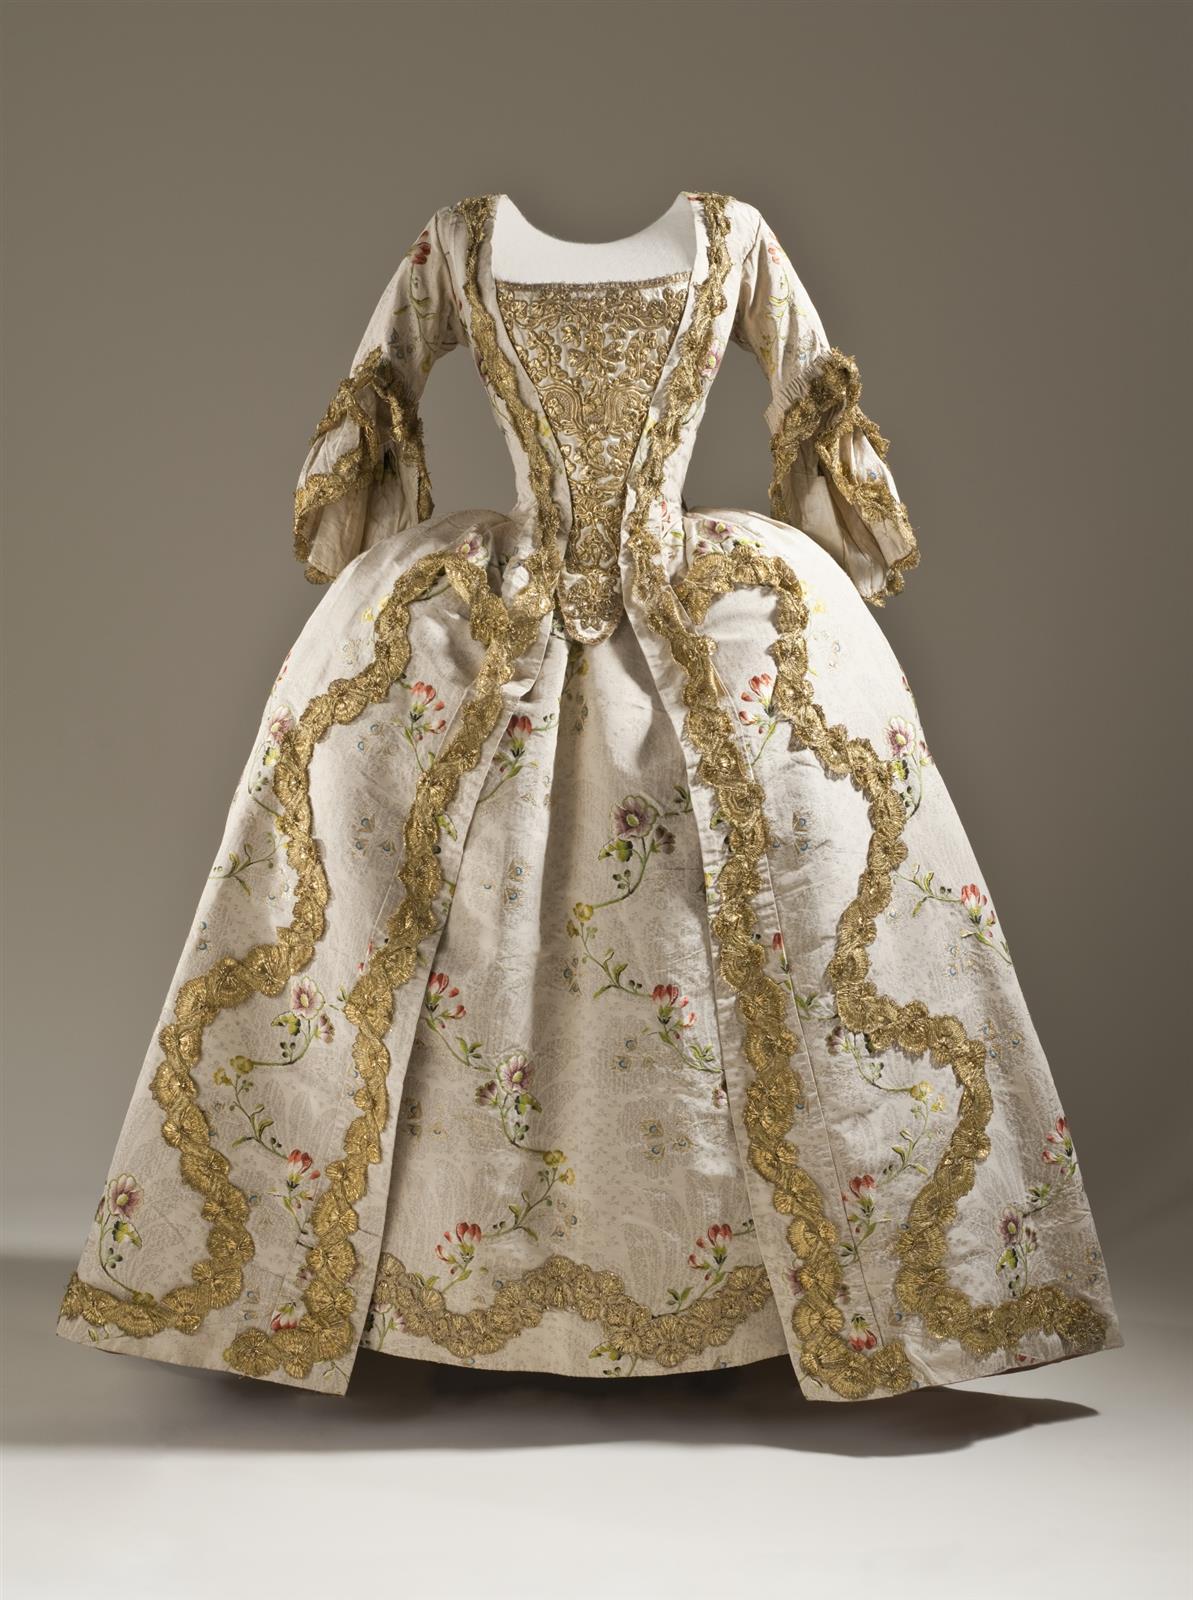 1760. Robe à la française. French. Silk plain weave (faille) with silk and metallic-thread supplementary weft patterning, and metallic lace trim. LACMA